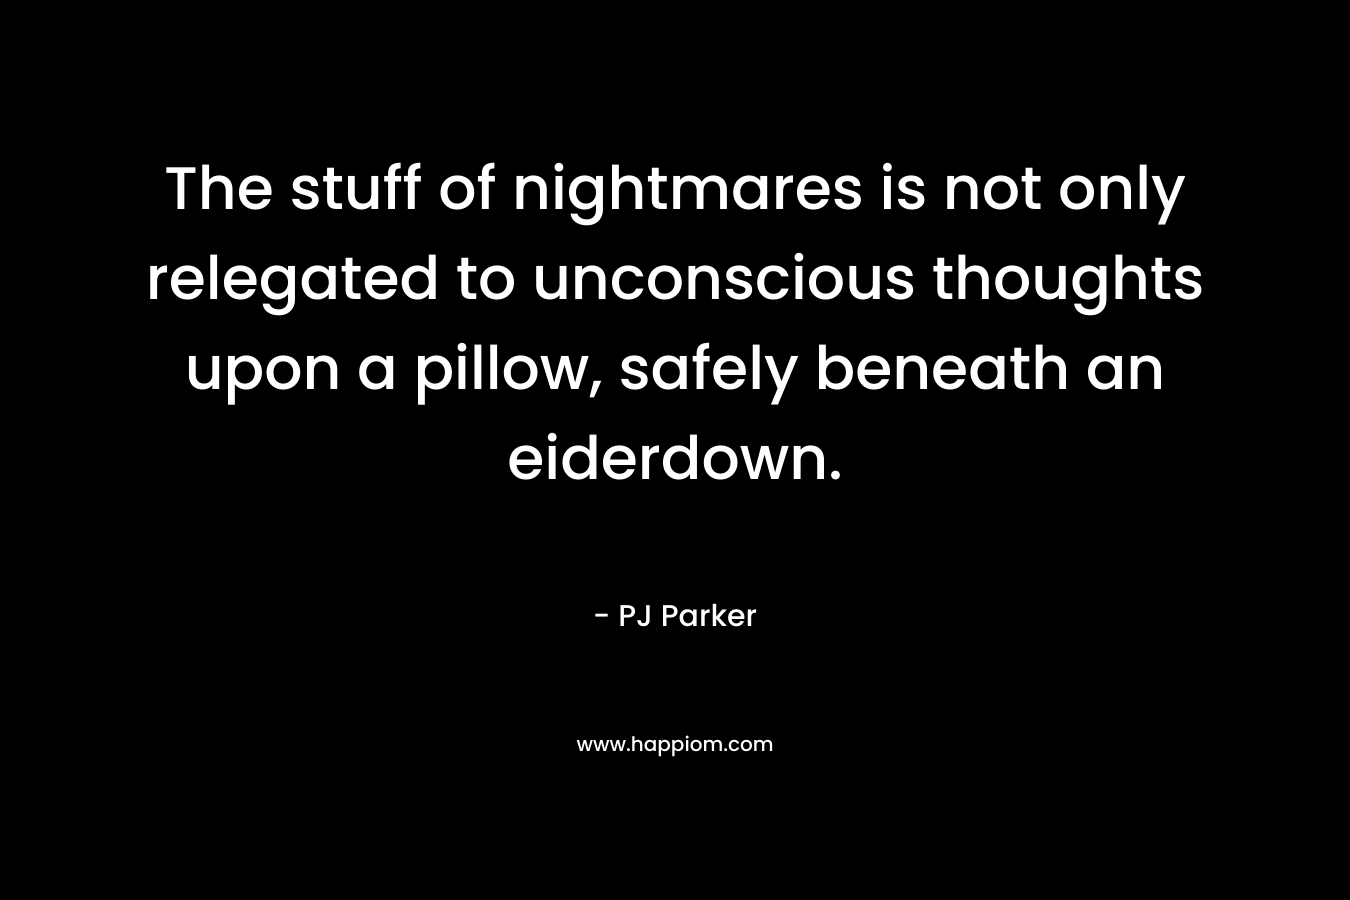 The stuff of nightmares is not only relegated to unconscious thoughts upon a pillow, safely beneath an eiderdown. – PJ Parker